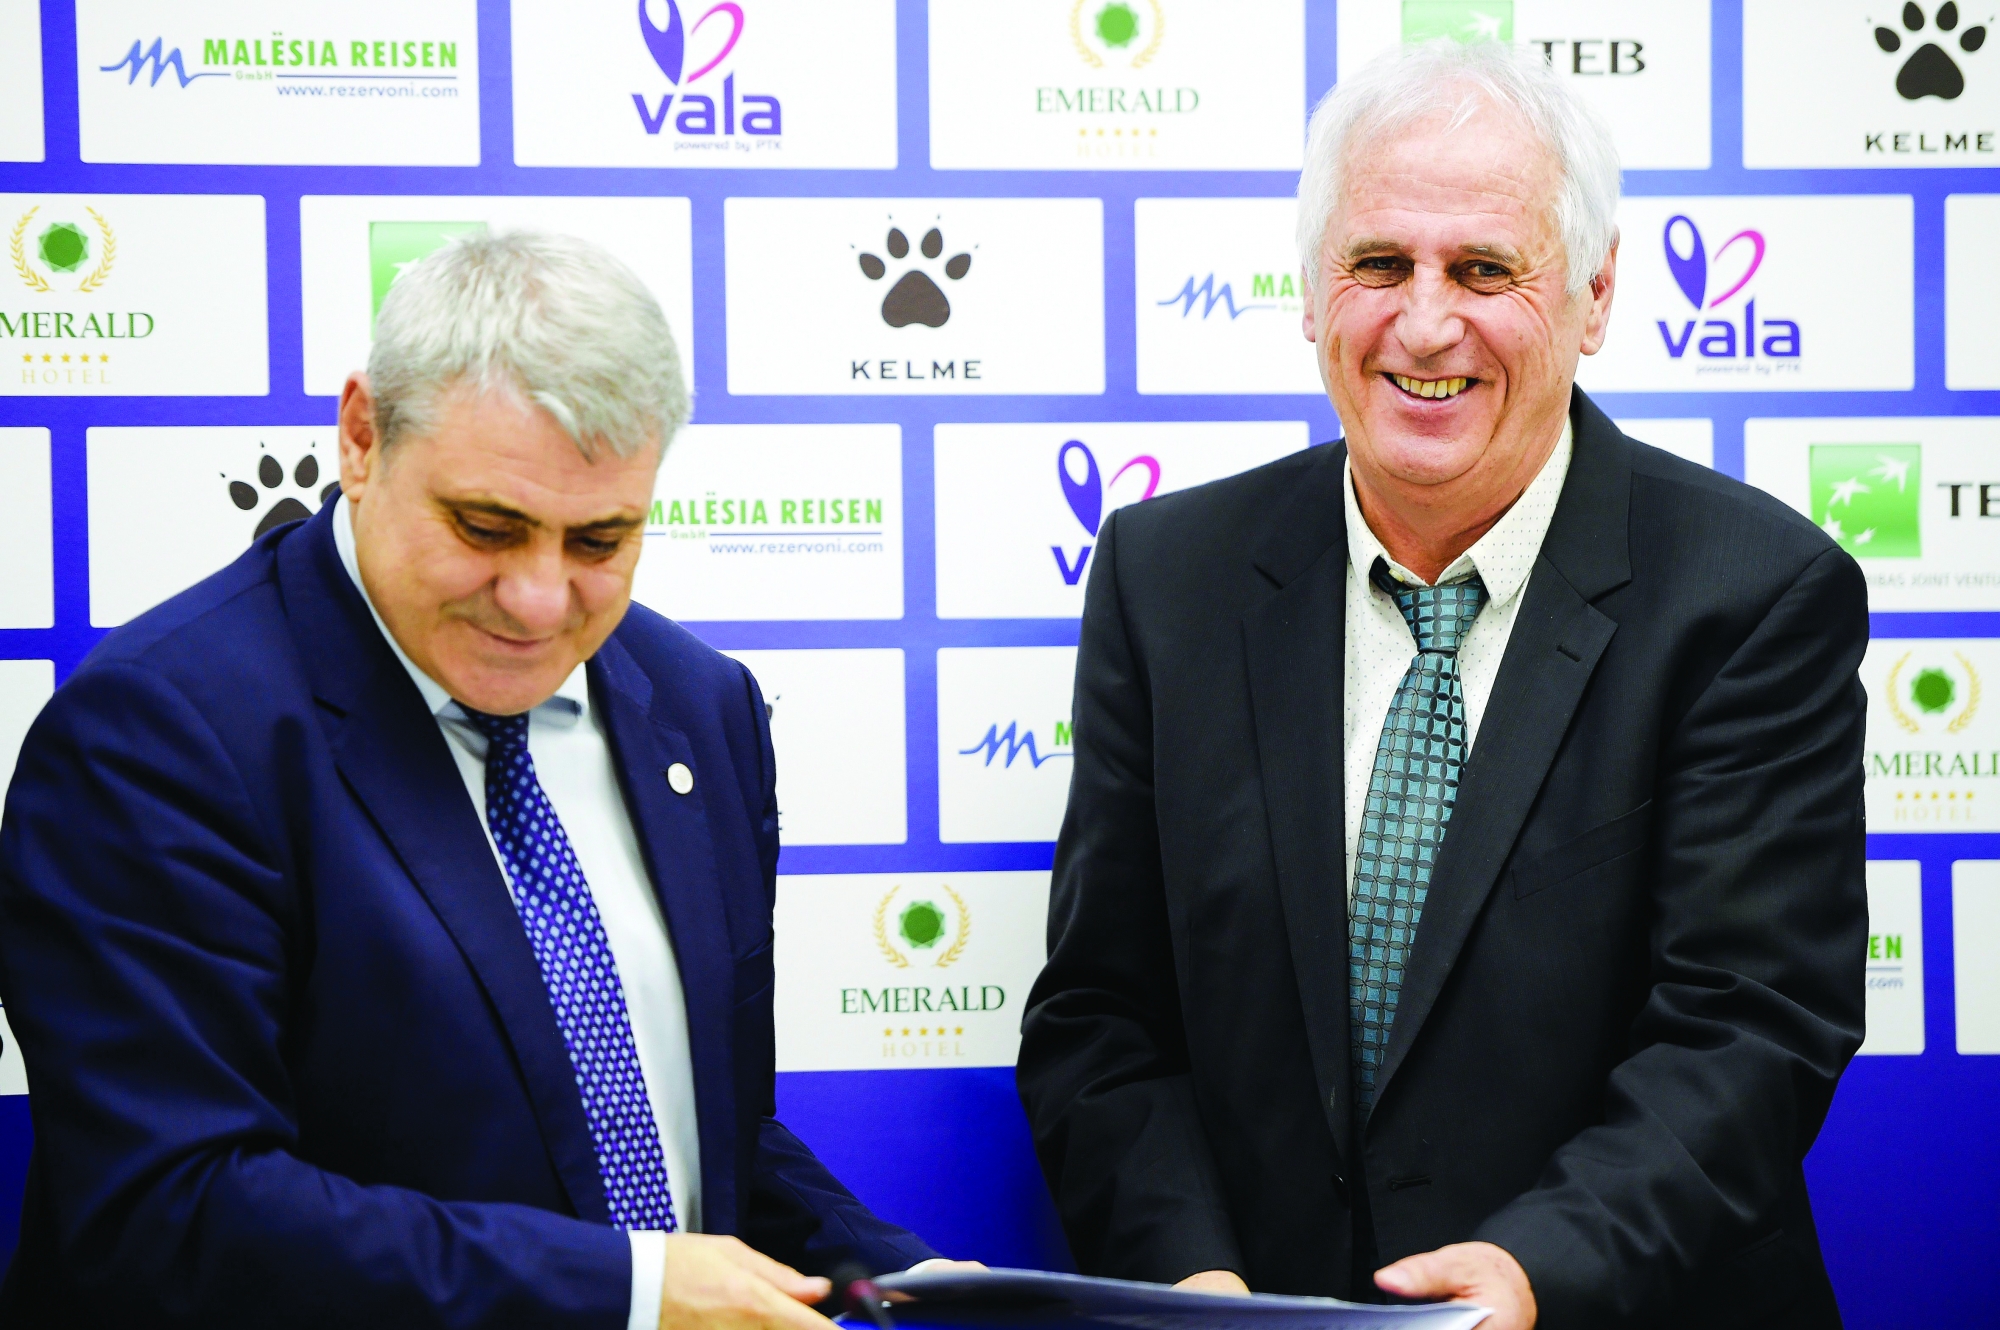 Newly appointed head coach of Kosovo national soccer team Bernard Challandes, right, smiles after signing a contract with president of the Kosovo soccer Federation Fadil Vokrri, during a press conference, in Pristina, Kosovo, Friday, March 2, 2018. The Kosovo soccer federation has appointed Challandes as coach of the national team. The 66-year-old Swiss coach signed a two-year contract.  (AP Photo/Visar Kryeziu) Kosovo New Coach